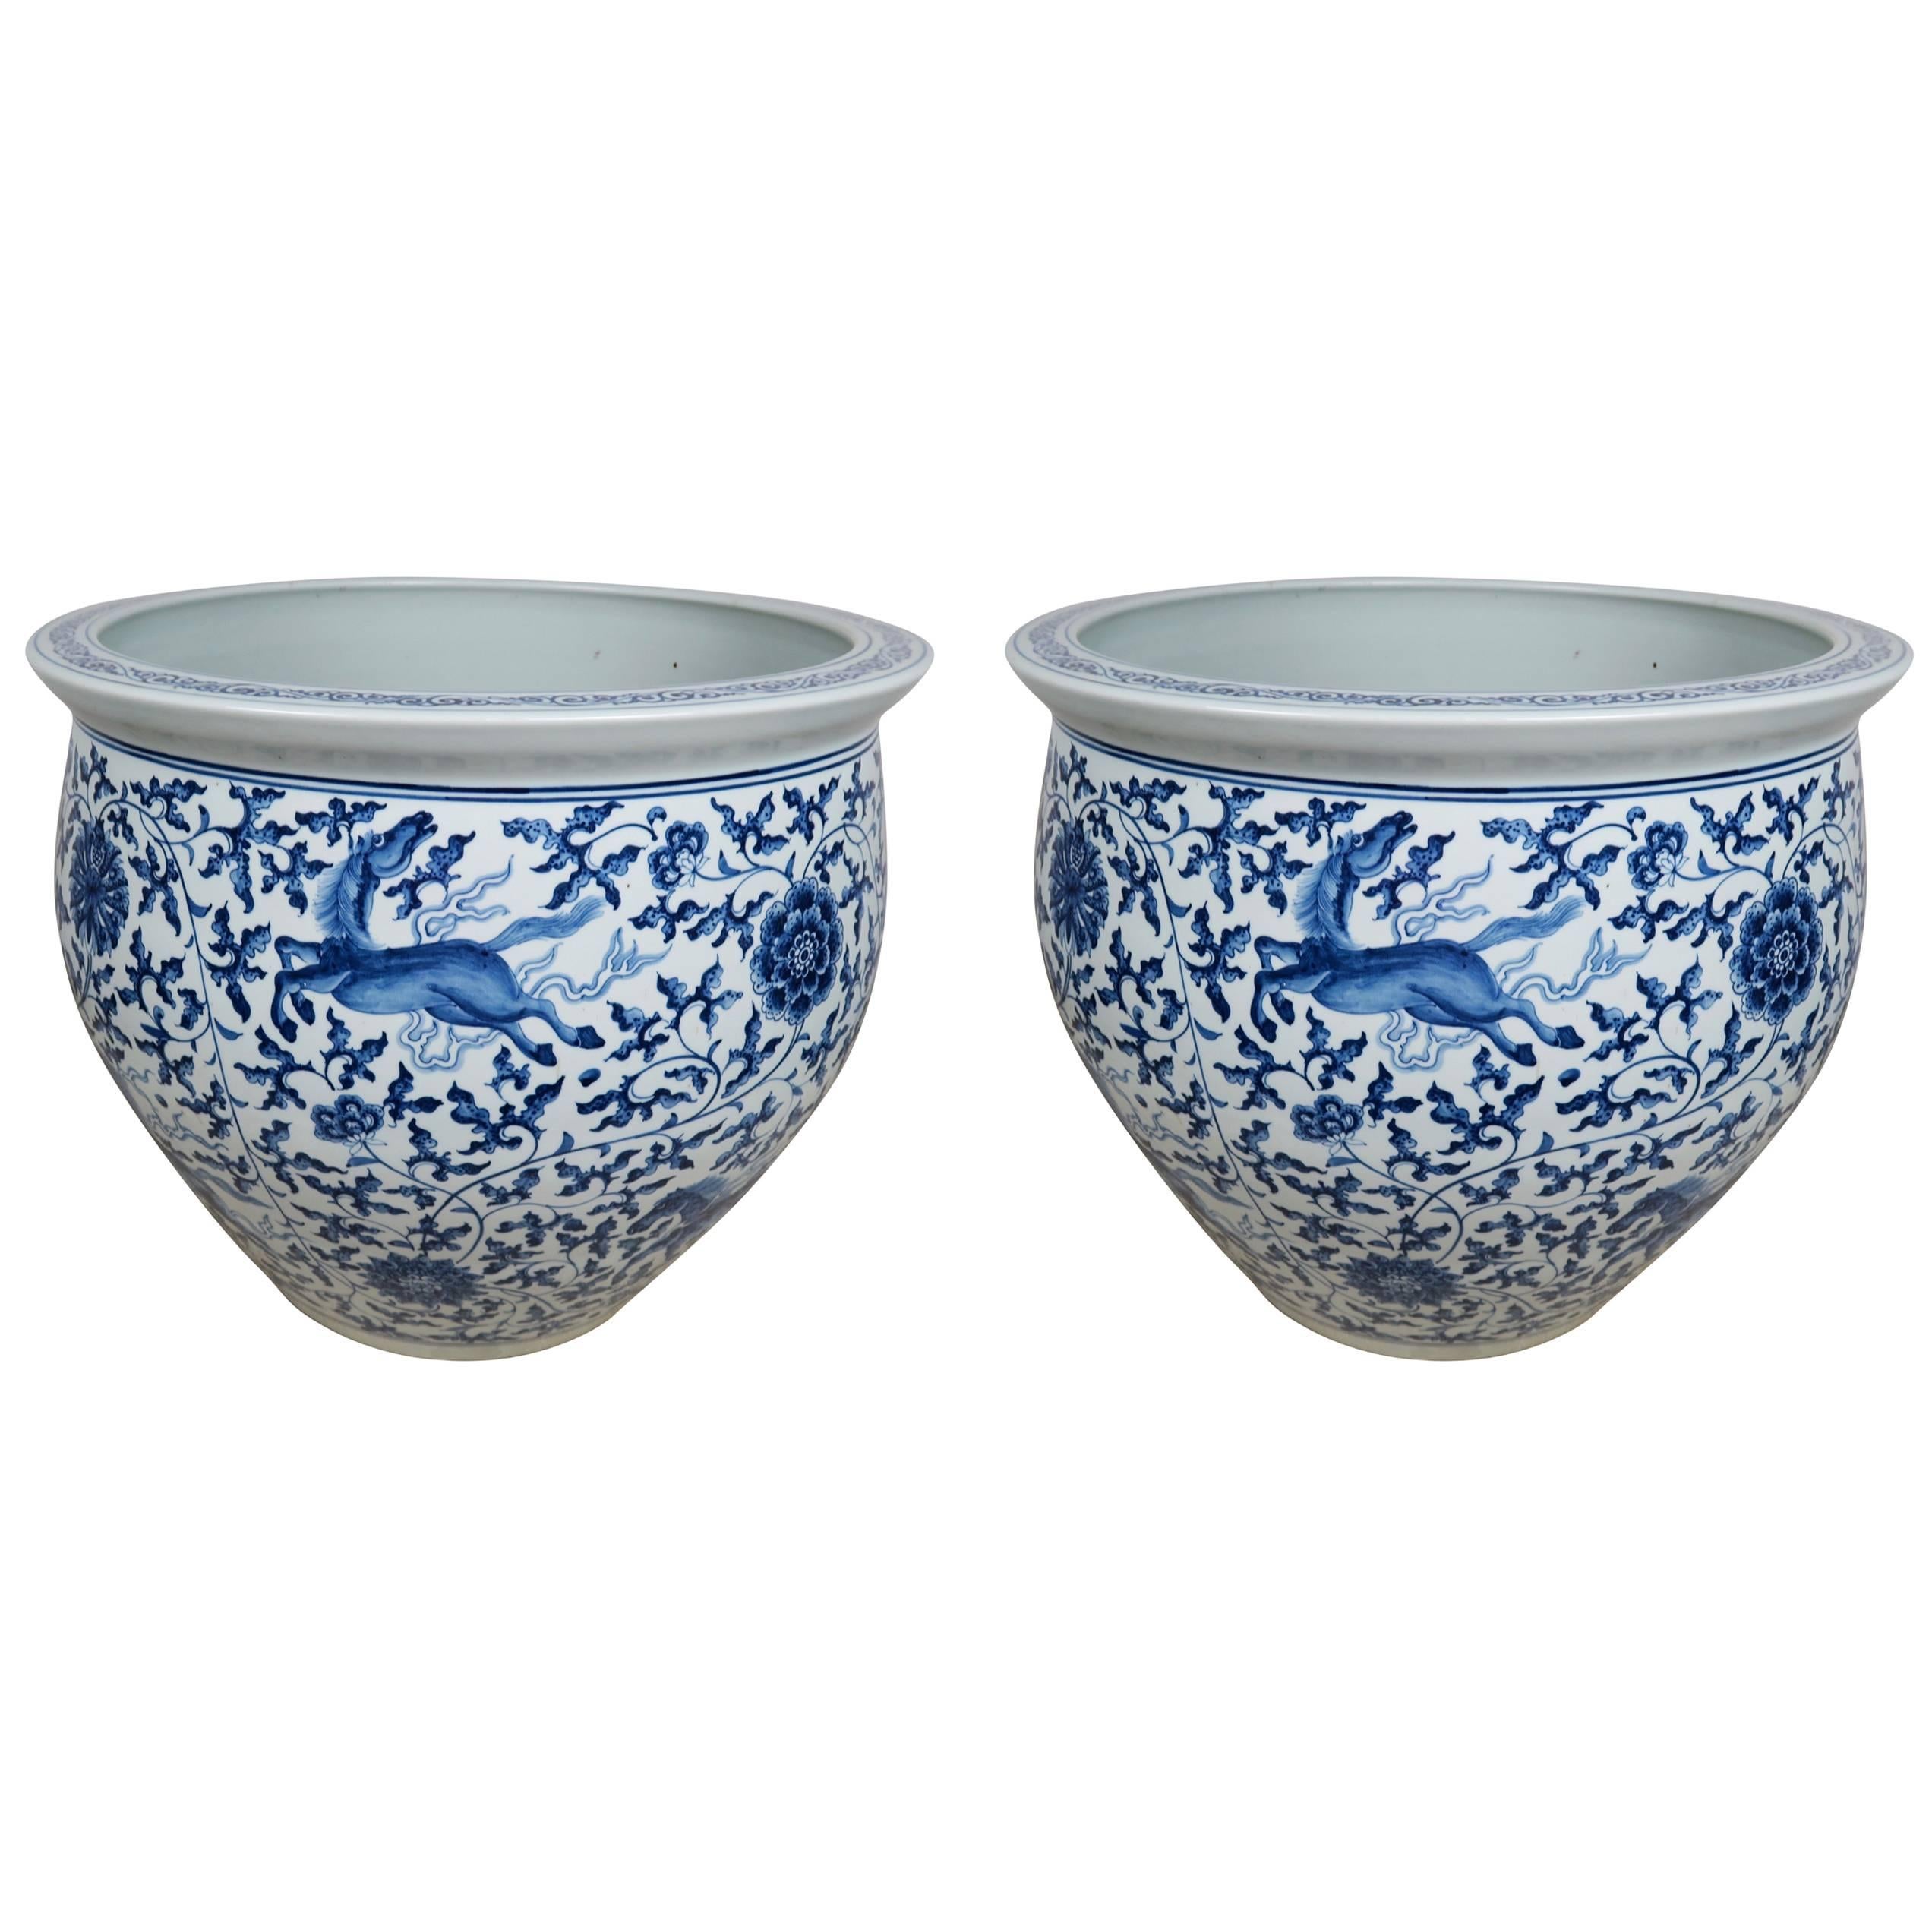 Chinese Porcelain Blue and White Planters, Pair